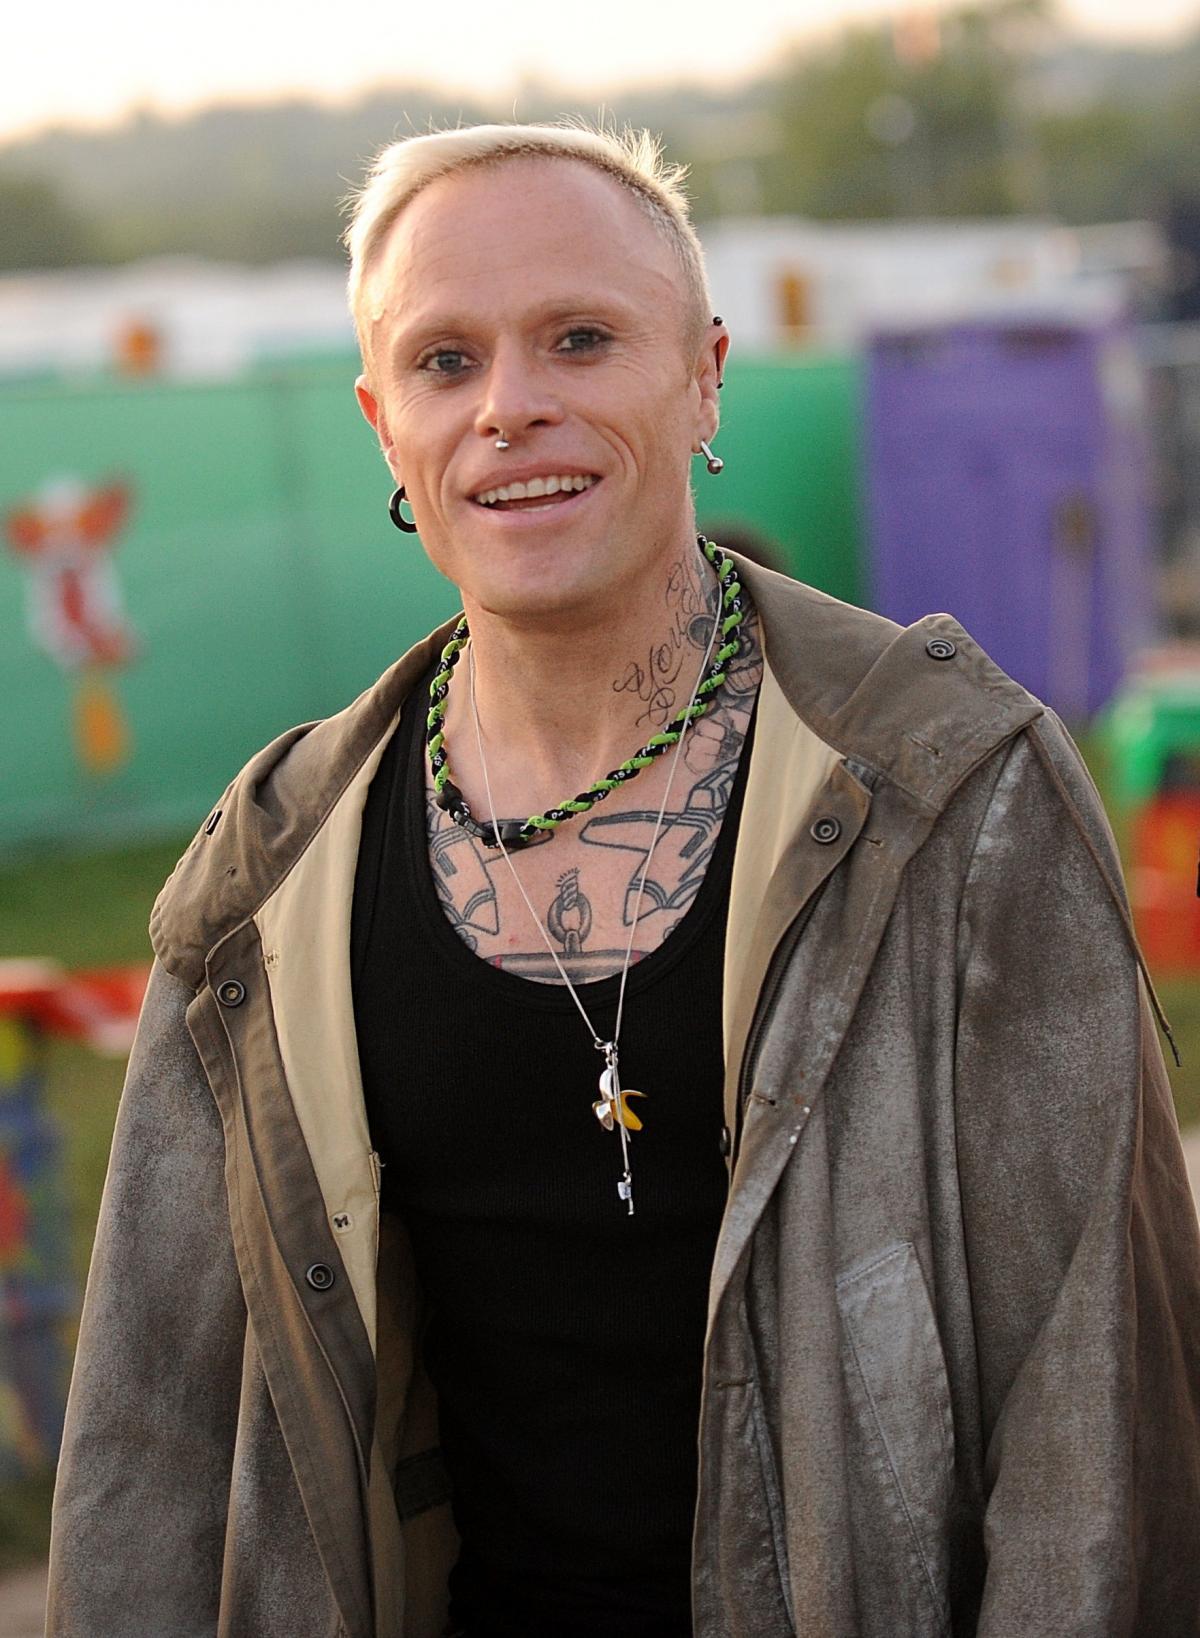 KEITH FLINT: The stars home has been sold nearly a year after his death